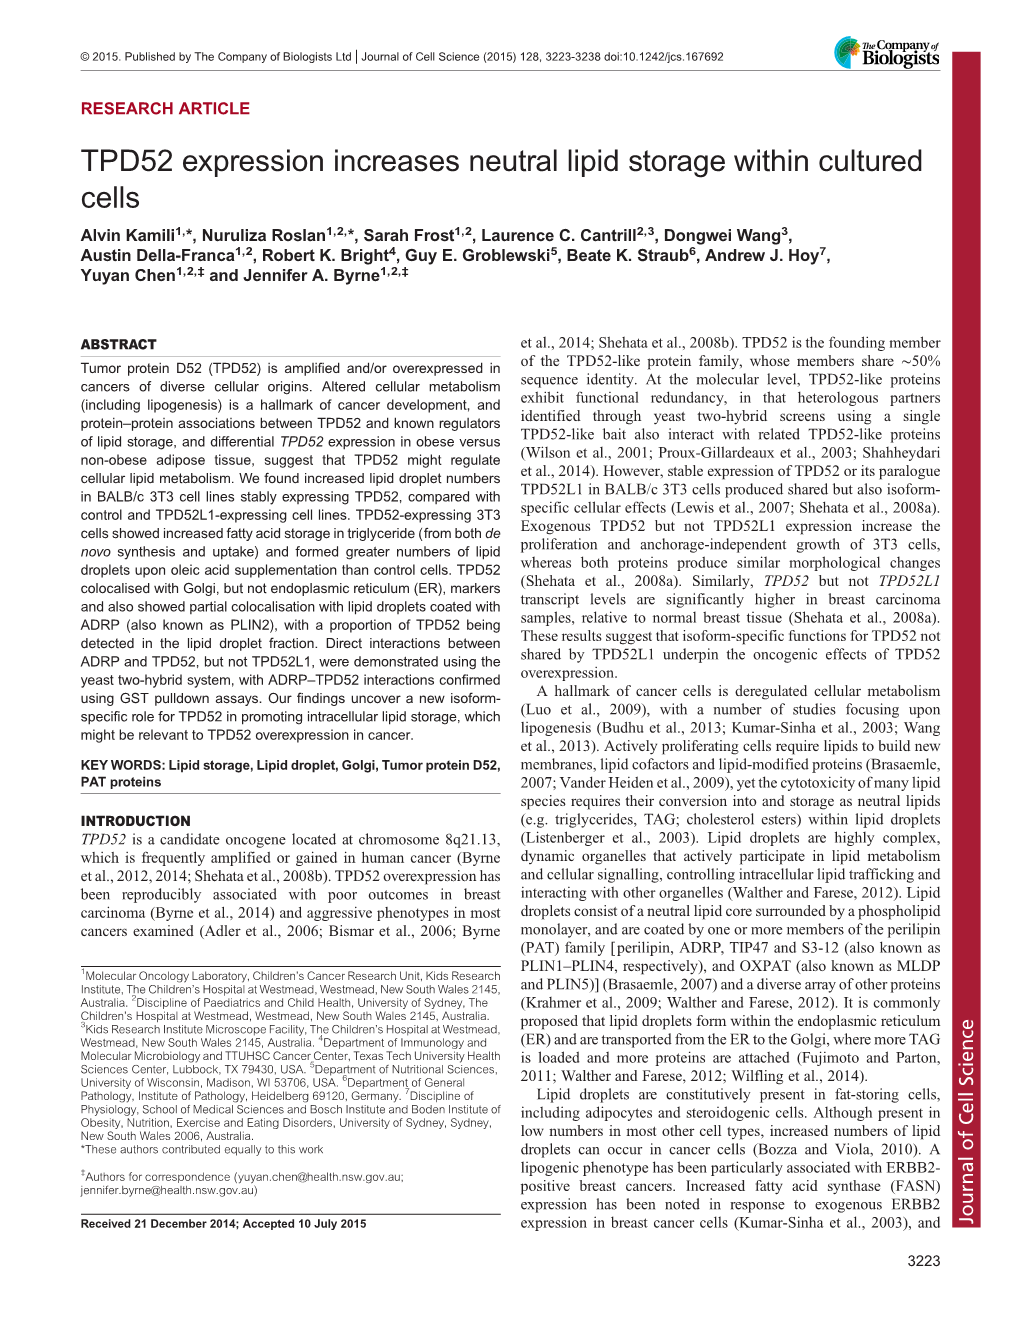 TPD52 Expression Increases Neutral Lipid Storage Within Cultured Cells Alvin Kamili1,*, Nuruliza Roslan1,2,*, Sarah Frost1,2, Laurence C